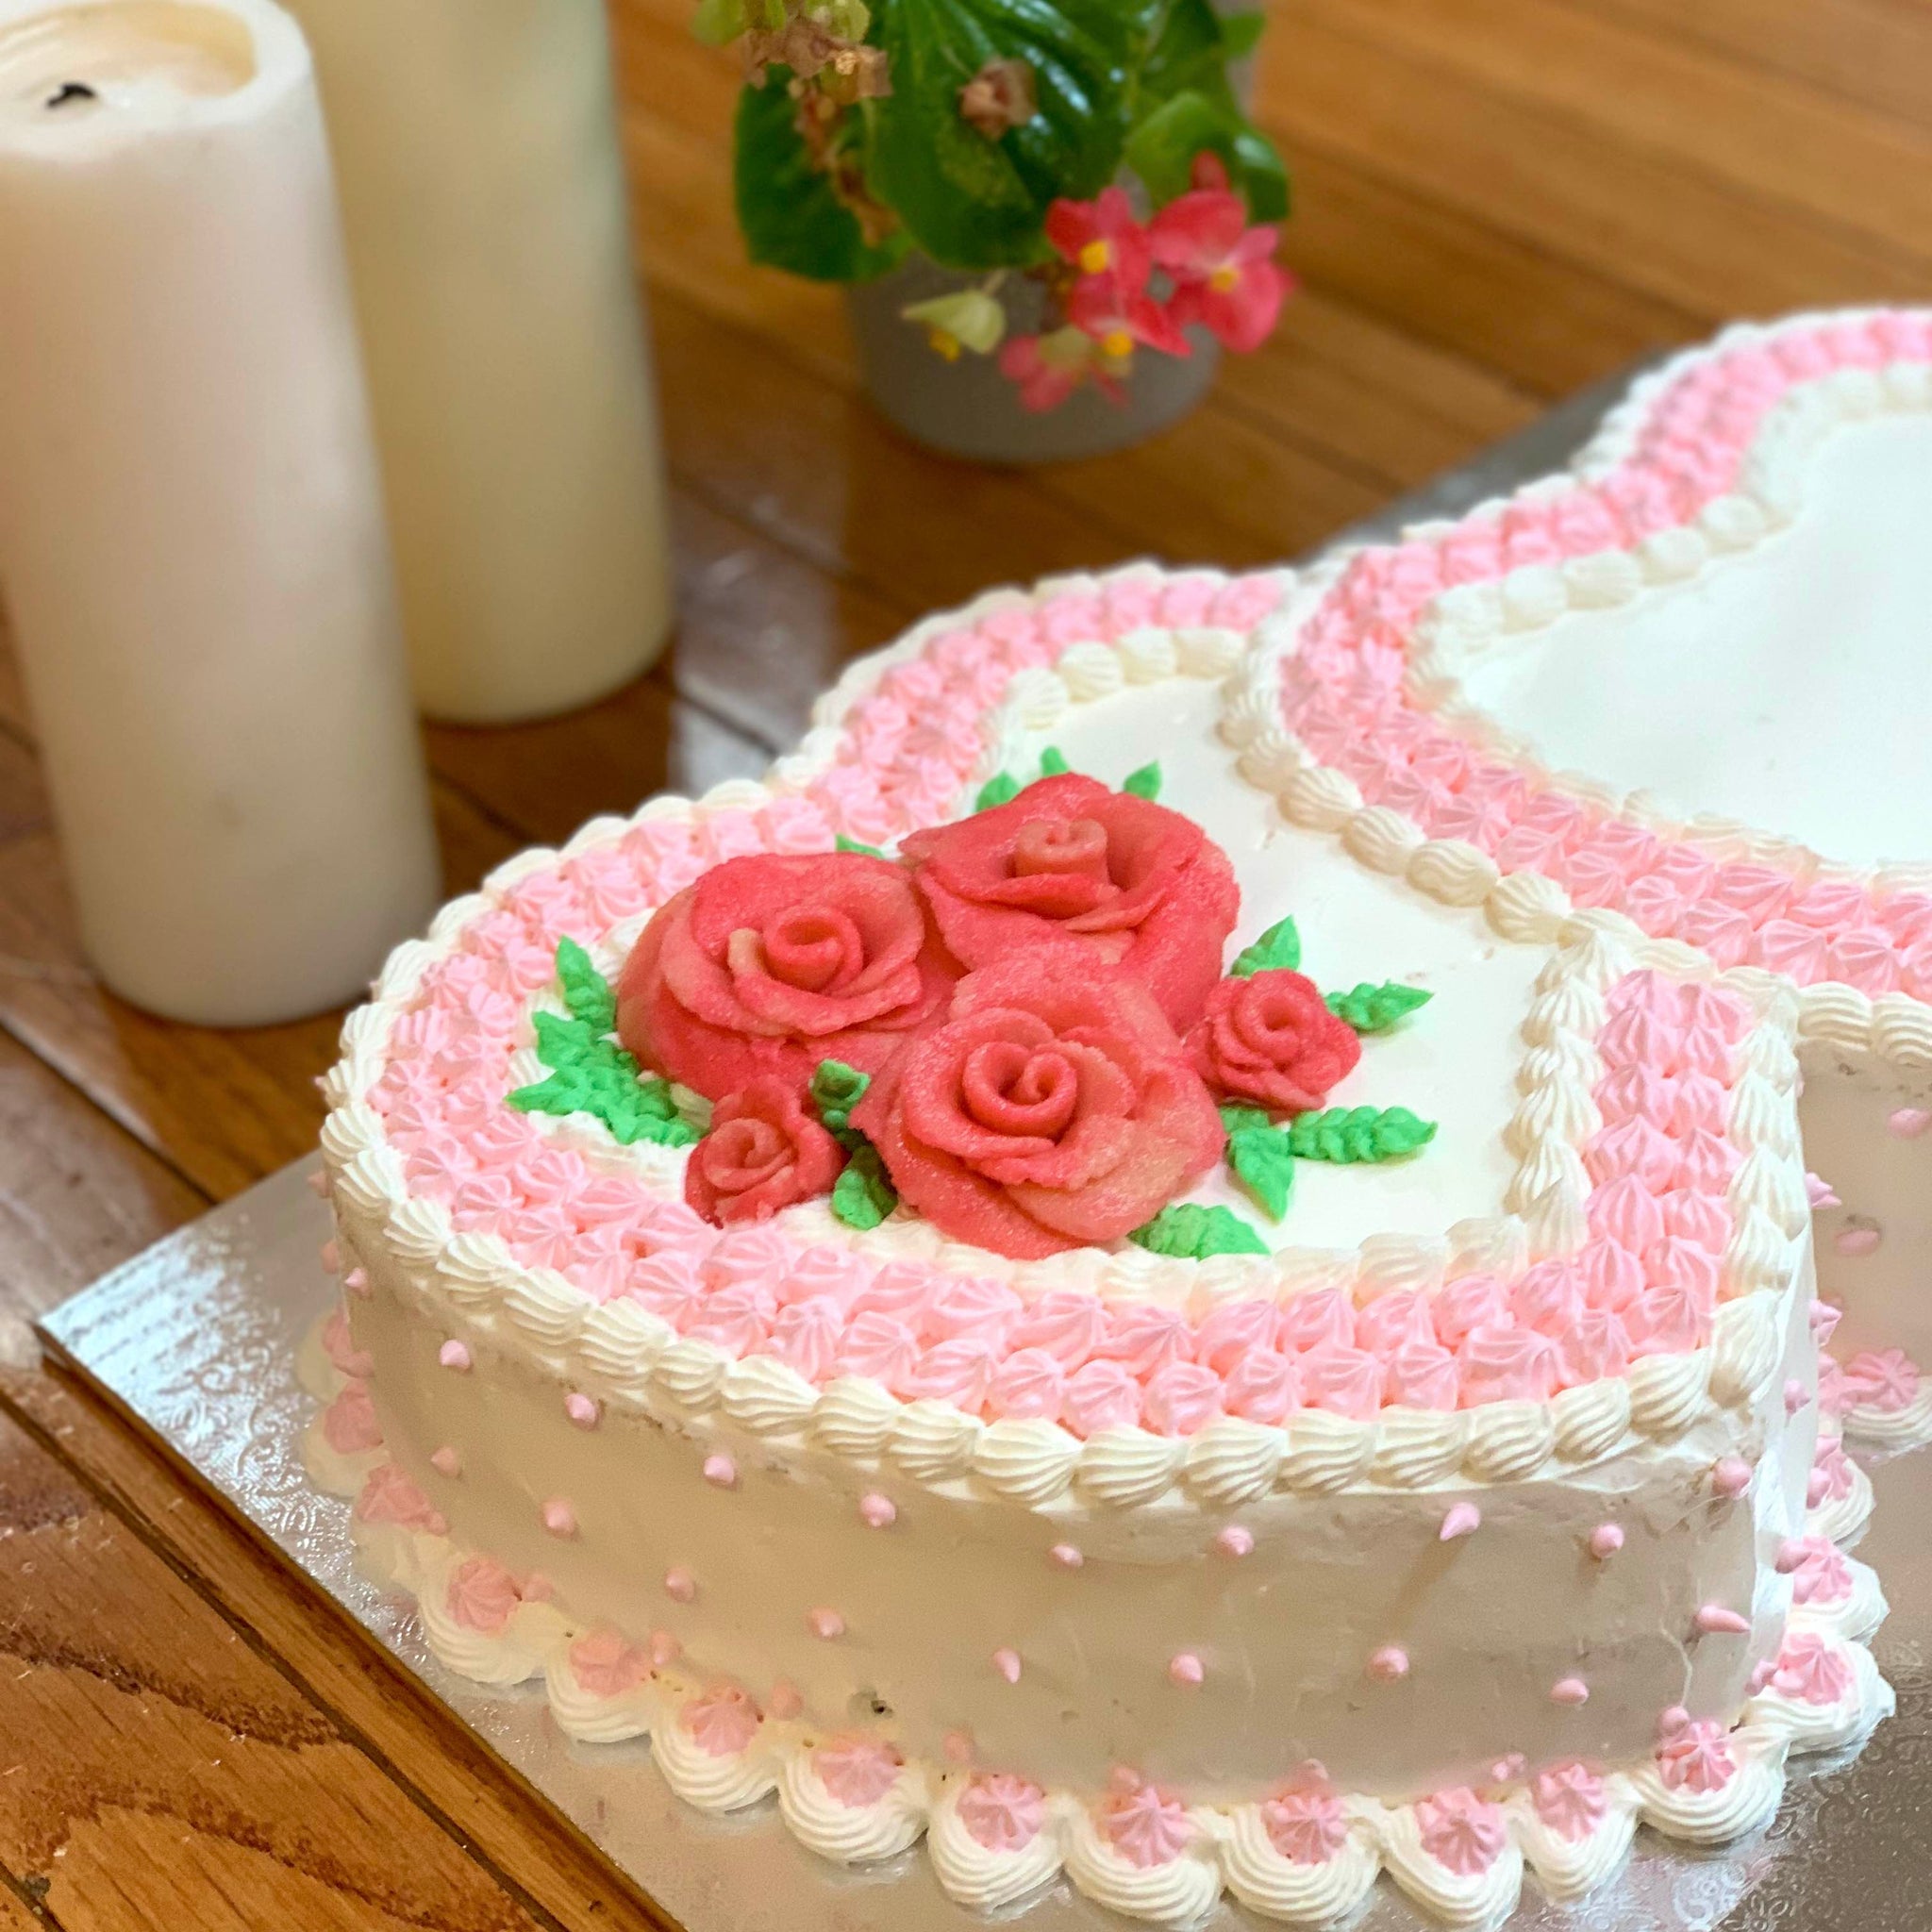 Double heart with flowers - Decorated Cake by Layla A - CakesDecor